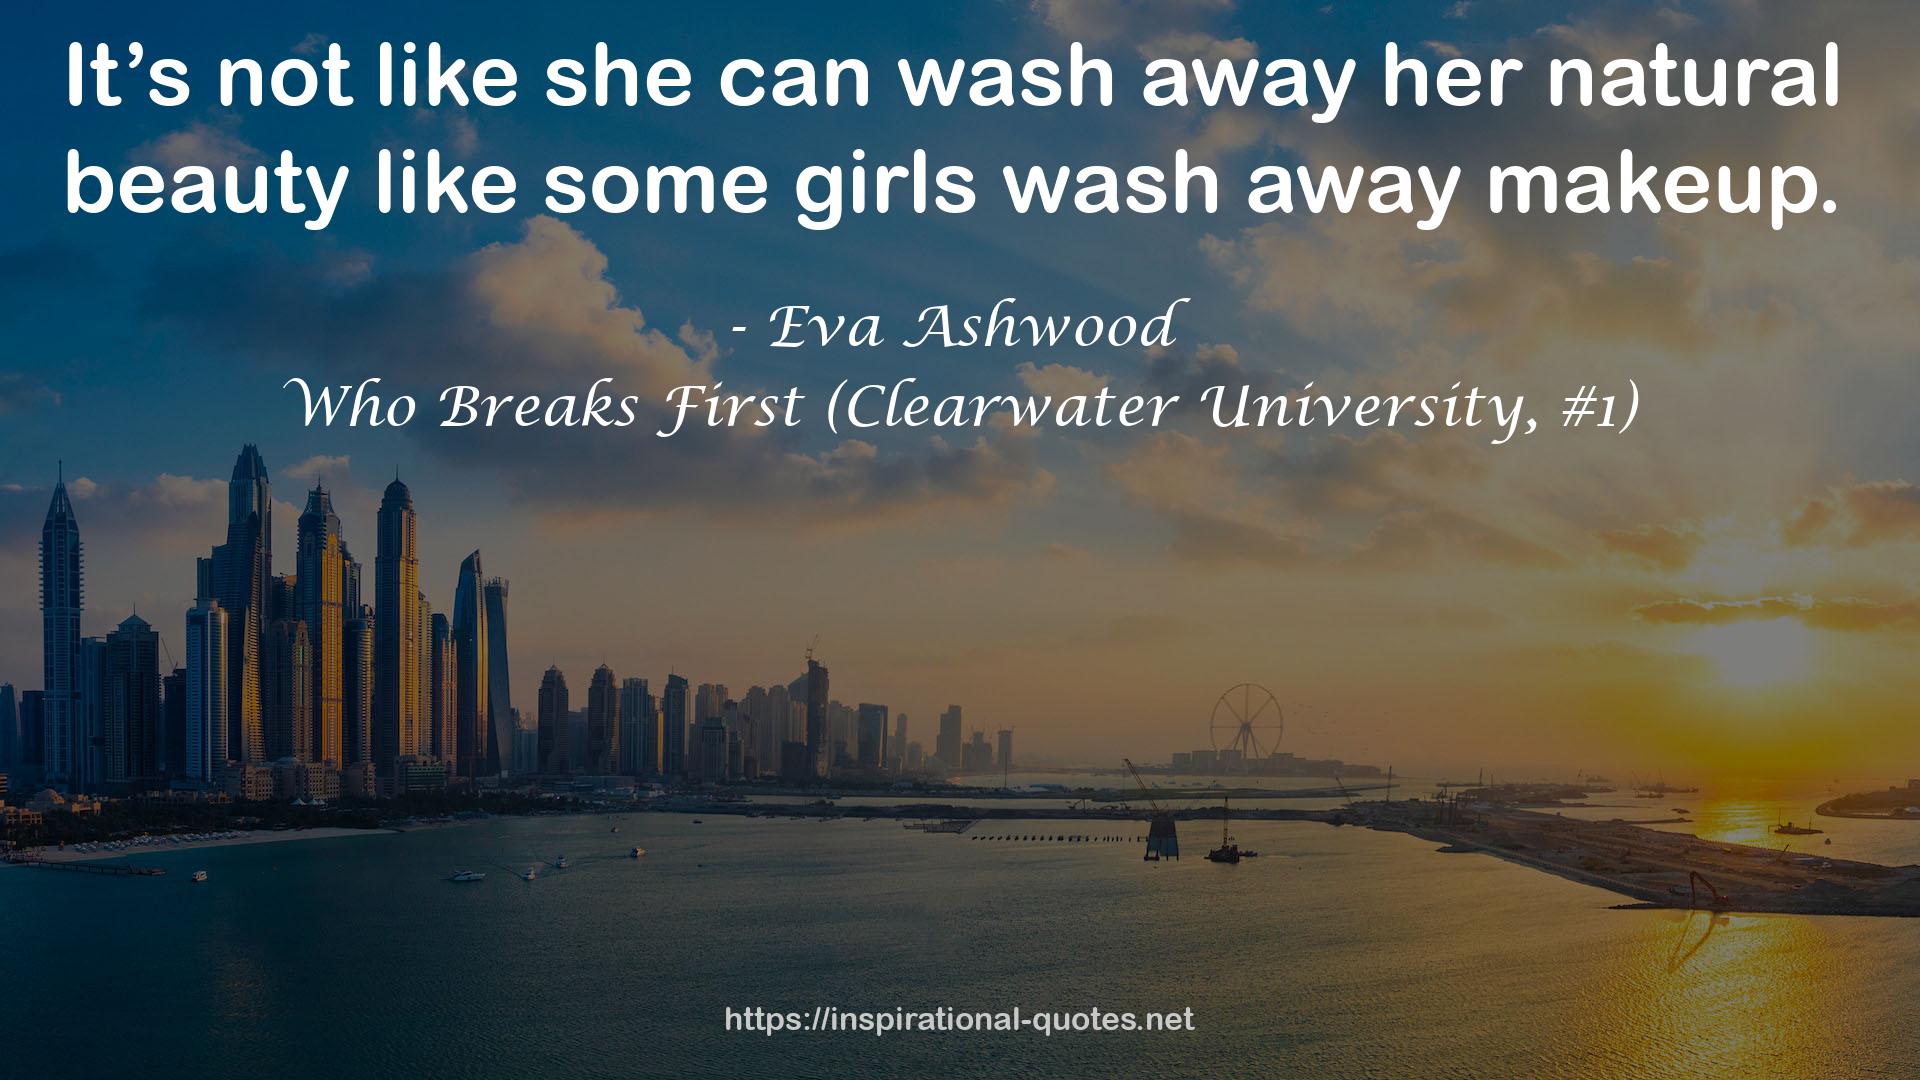 Who Breaks First (Clearwater University, #1) QUOTES